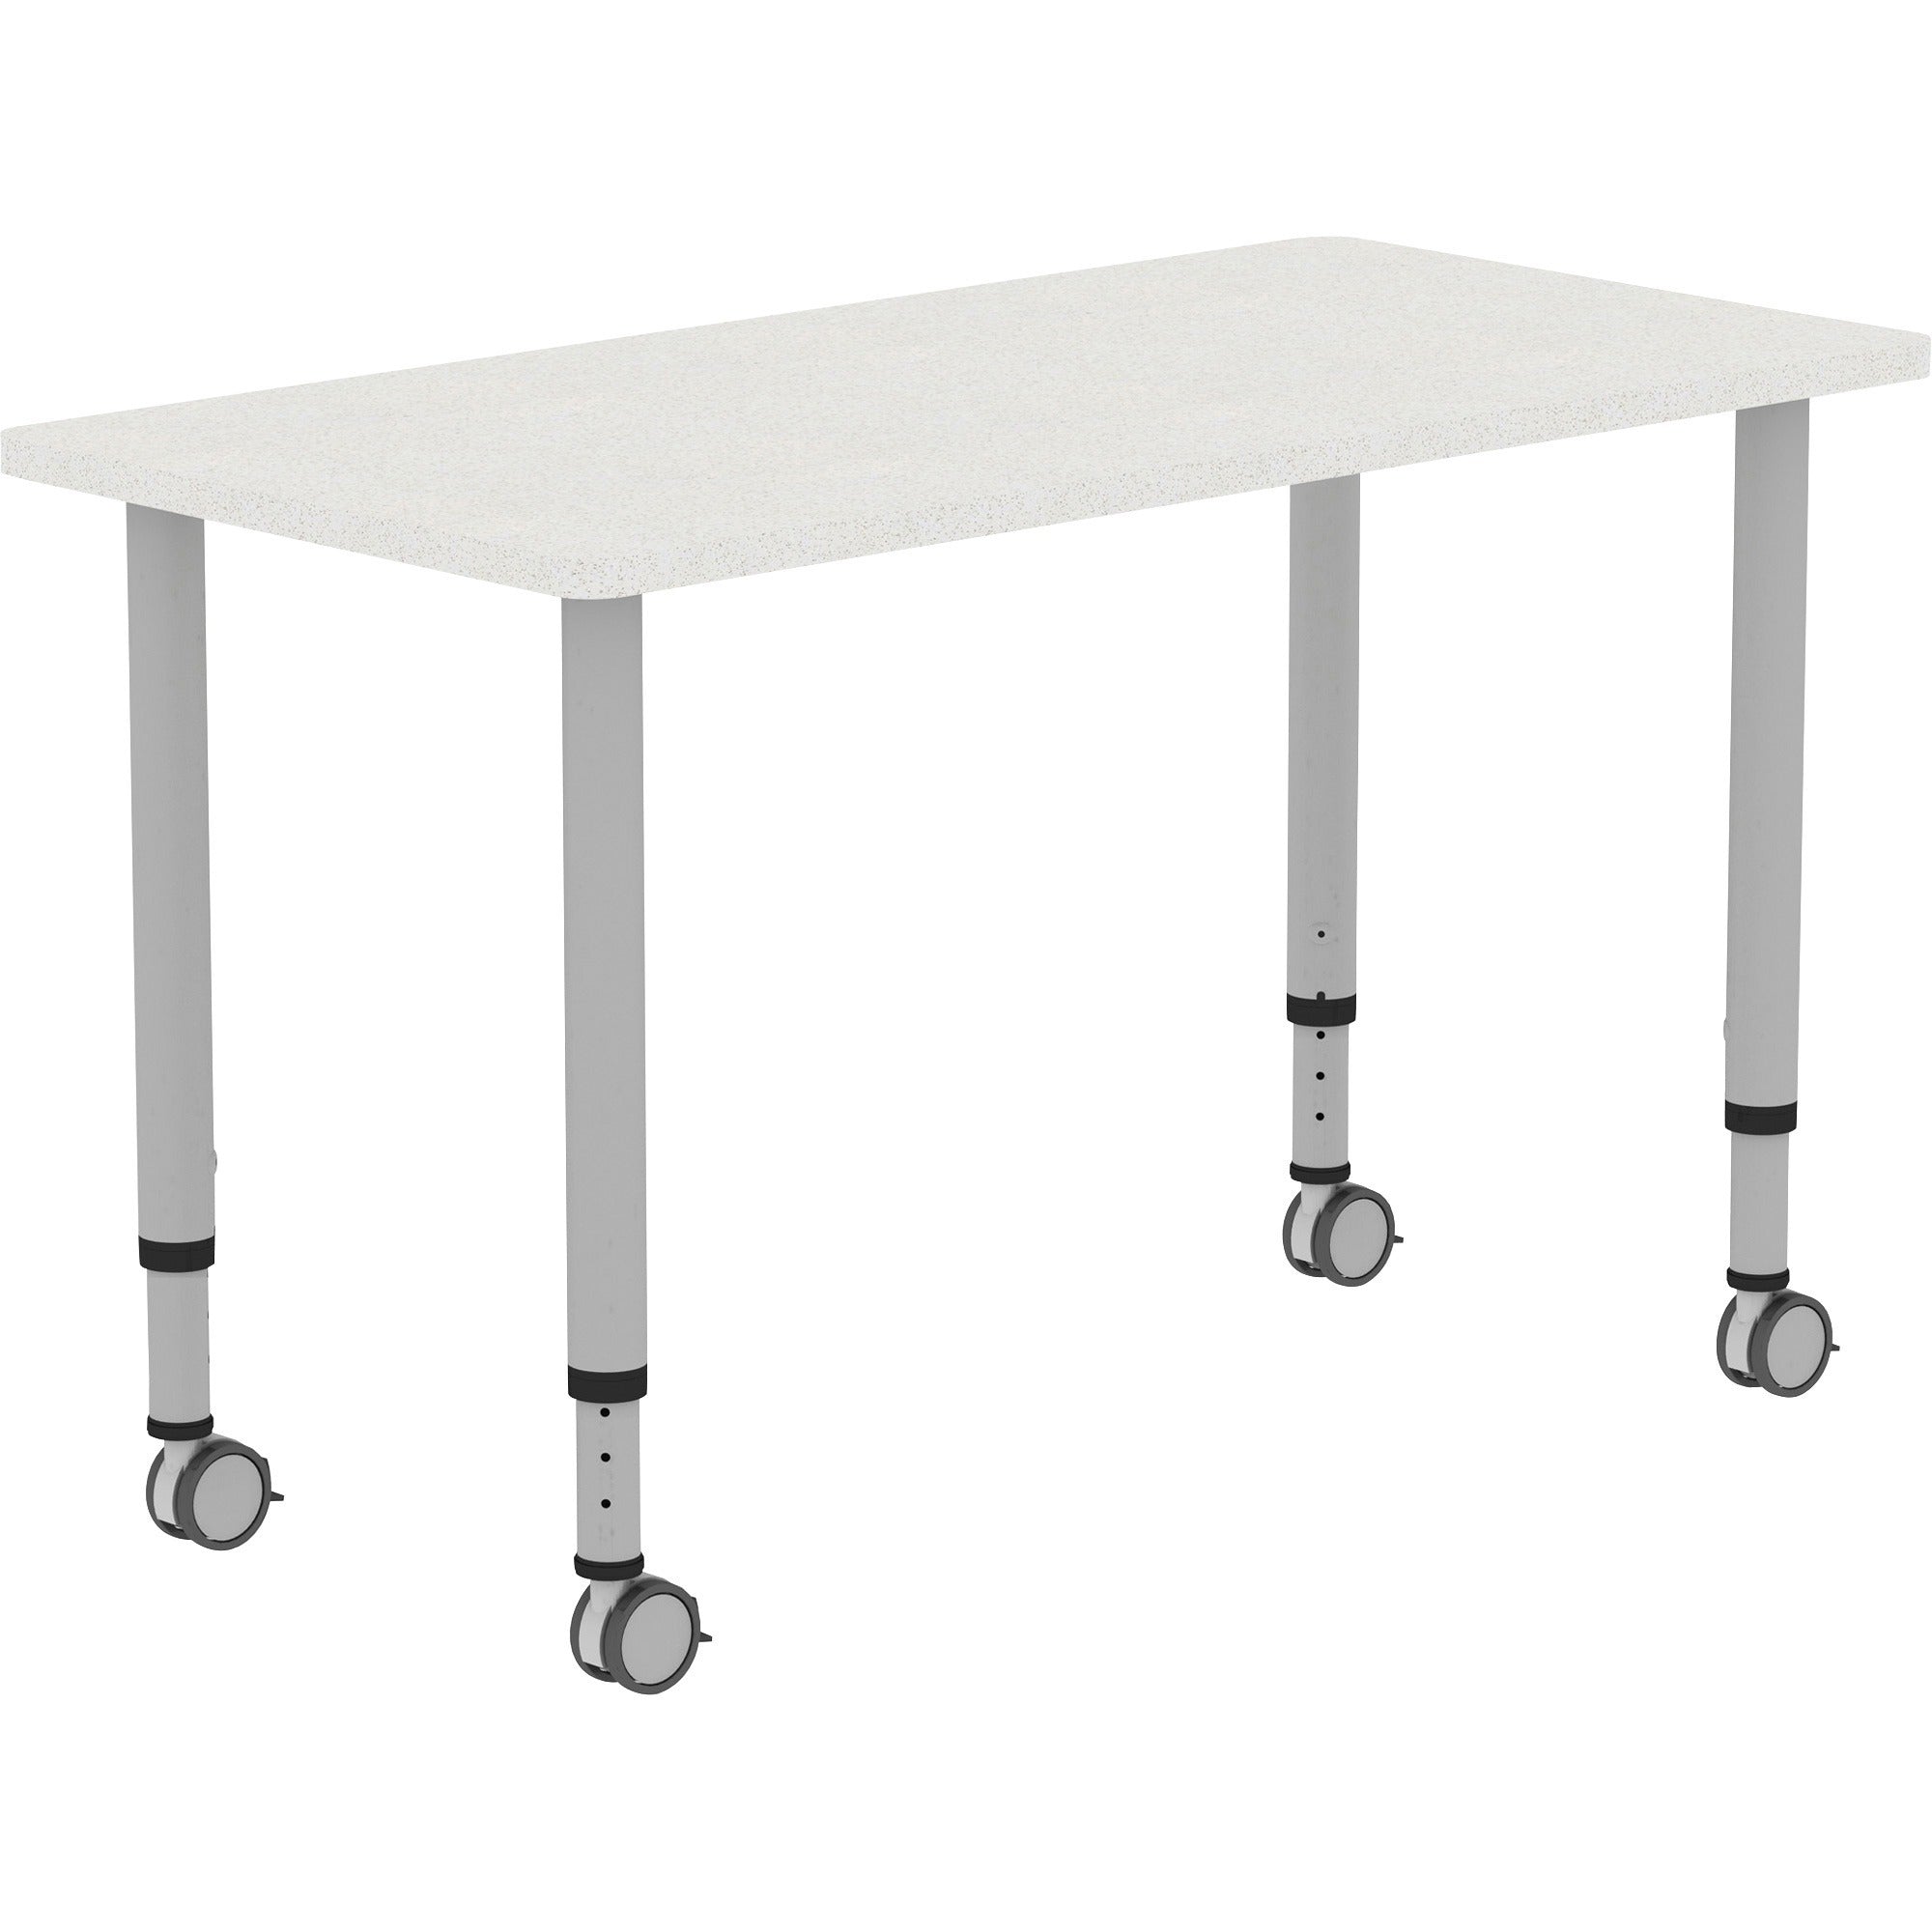 lorell-attune-height-adjustable-multipurpose-rectangular-table-for-table-toprectangle-top-adjustable-height-2662-to-3362-adjustment-x-48-table-top-width-x-2362-table-top-depth-3362-height-assembly-required-laminated-gray-lam_llr69581 - 1